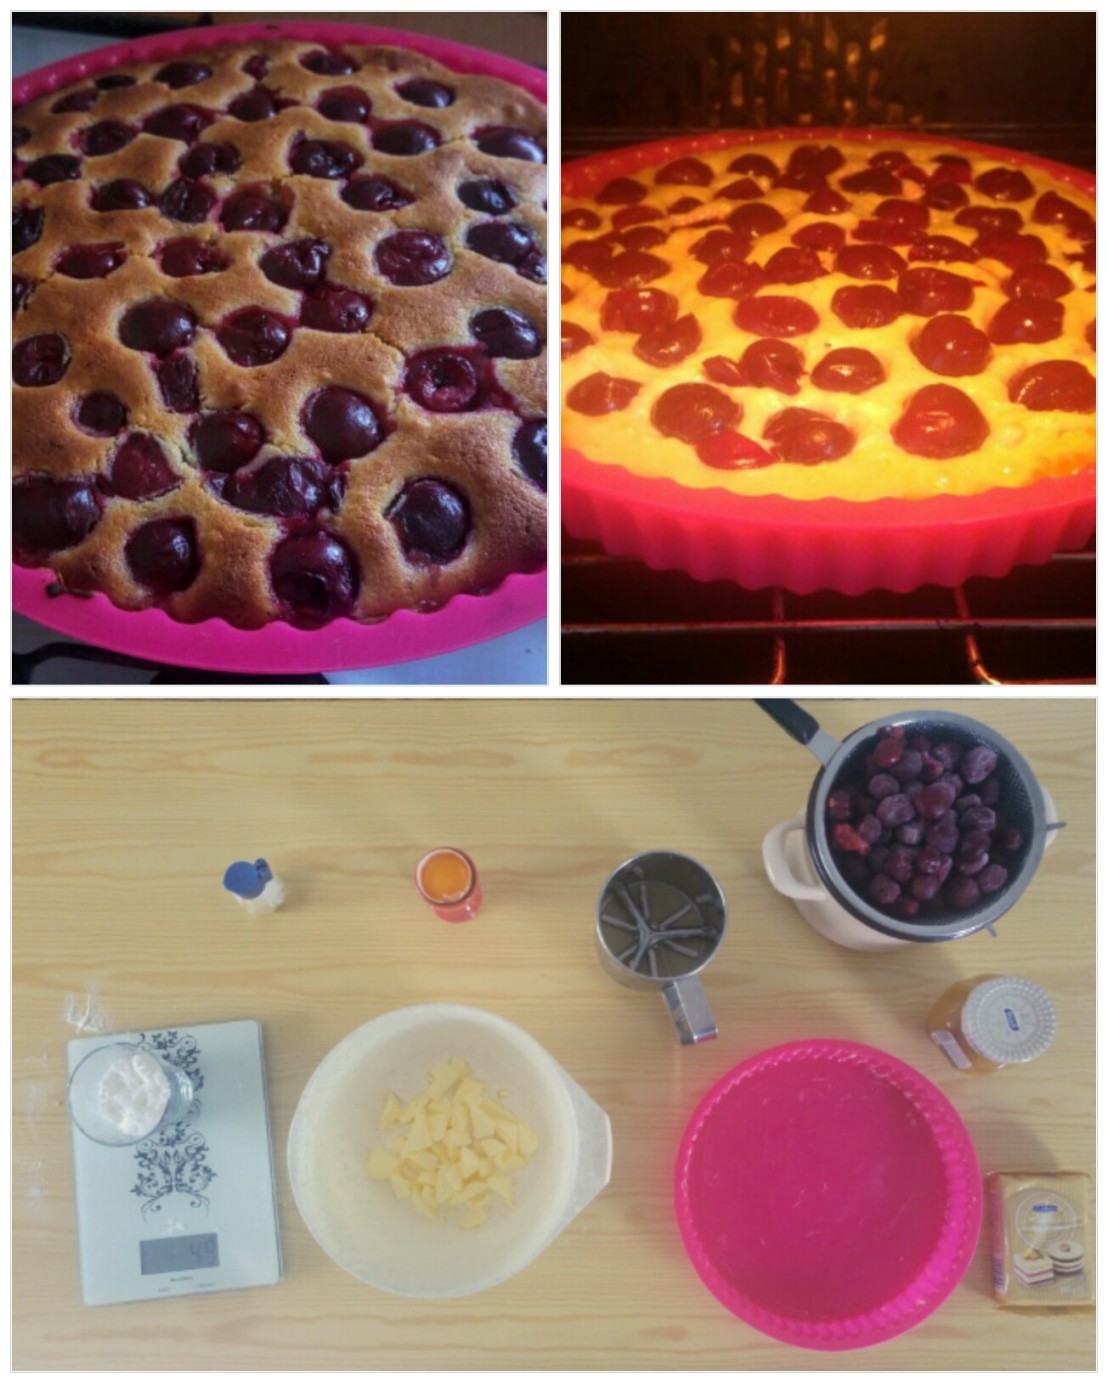 Collage - ingredients, marzipan cherry tart in the oven and baked